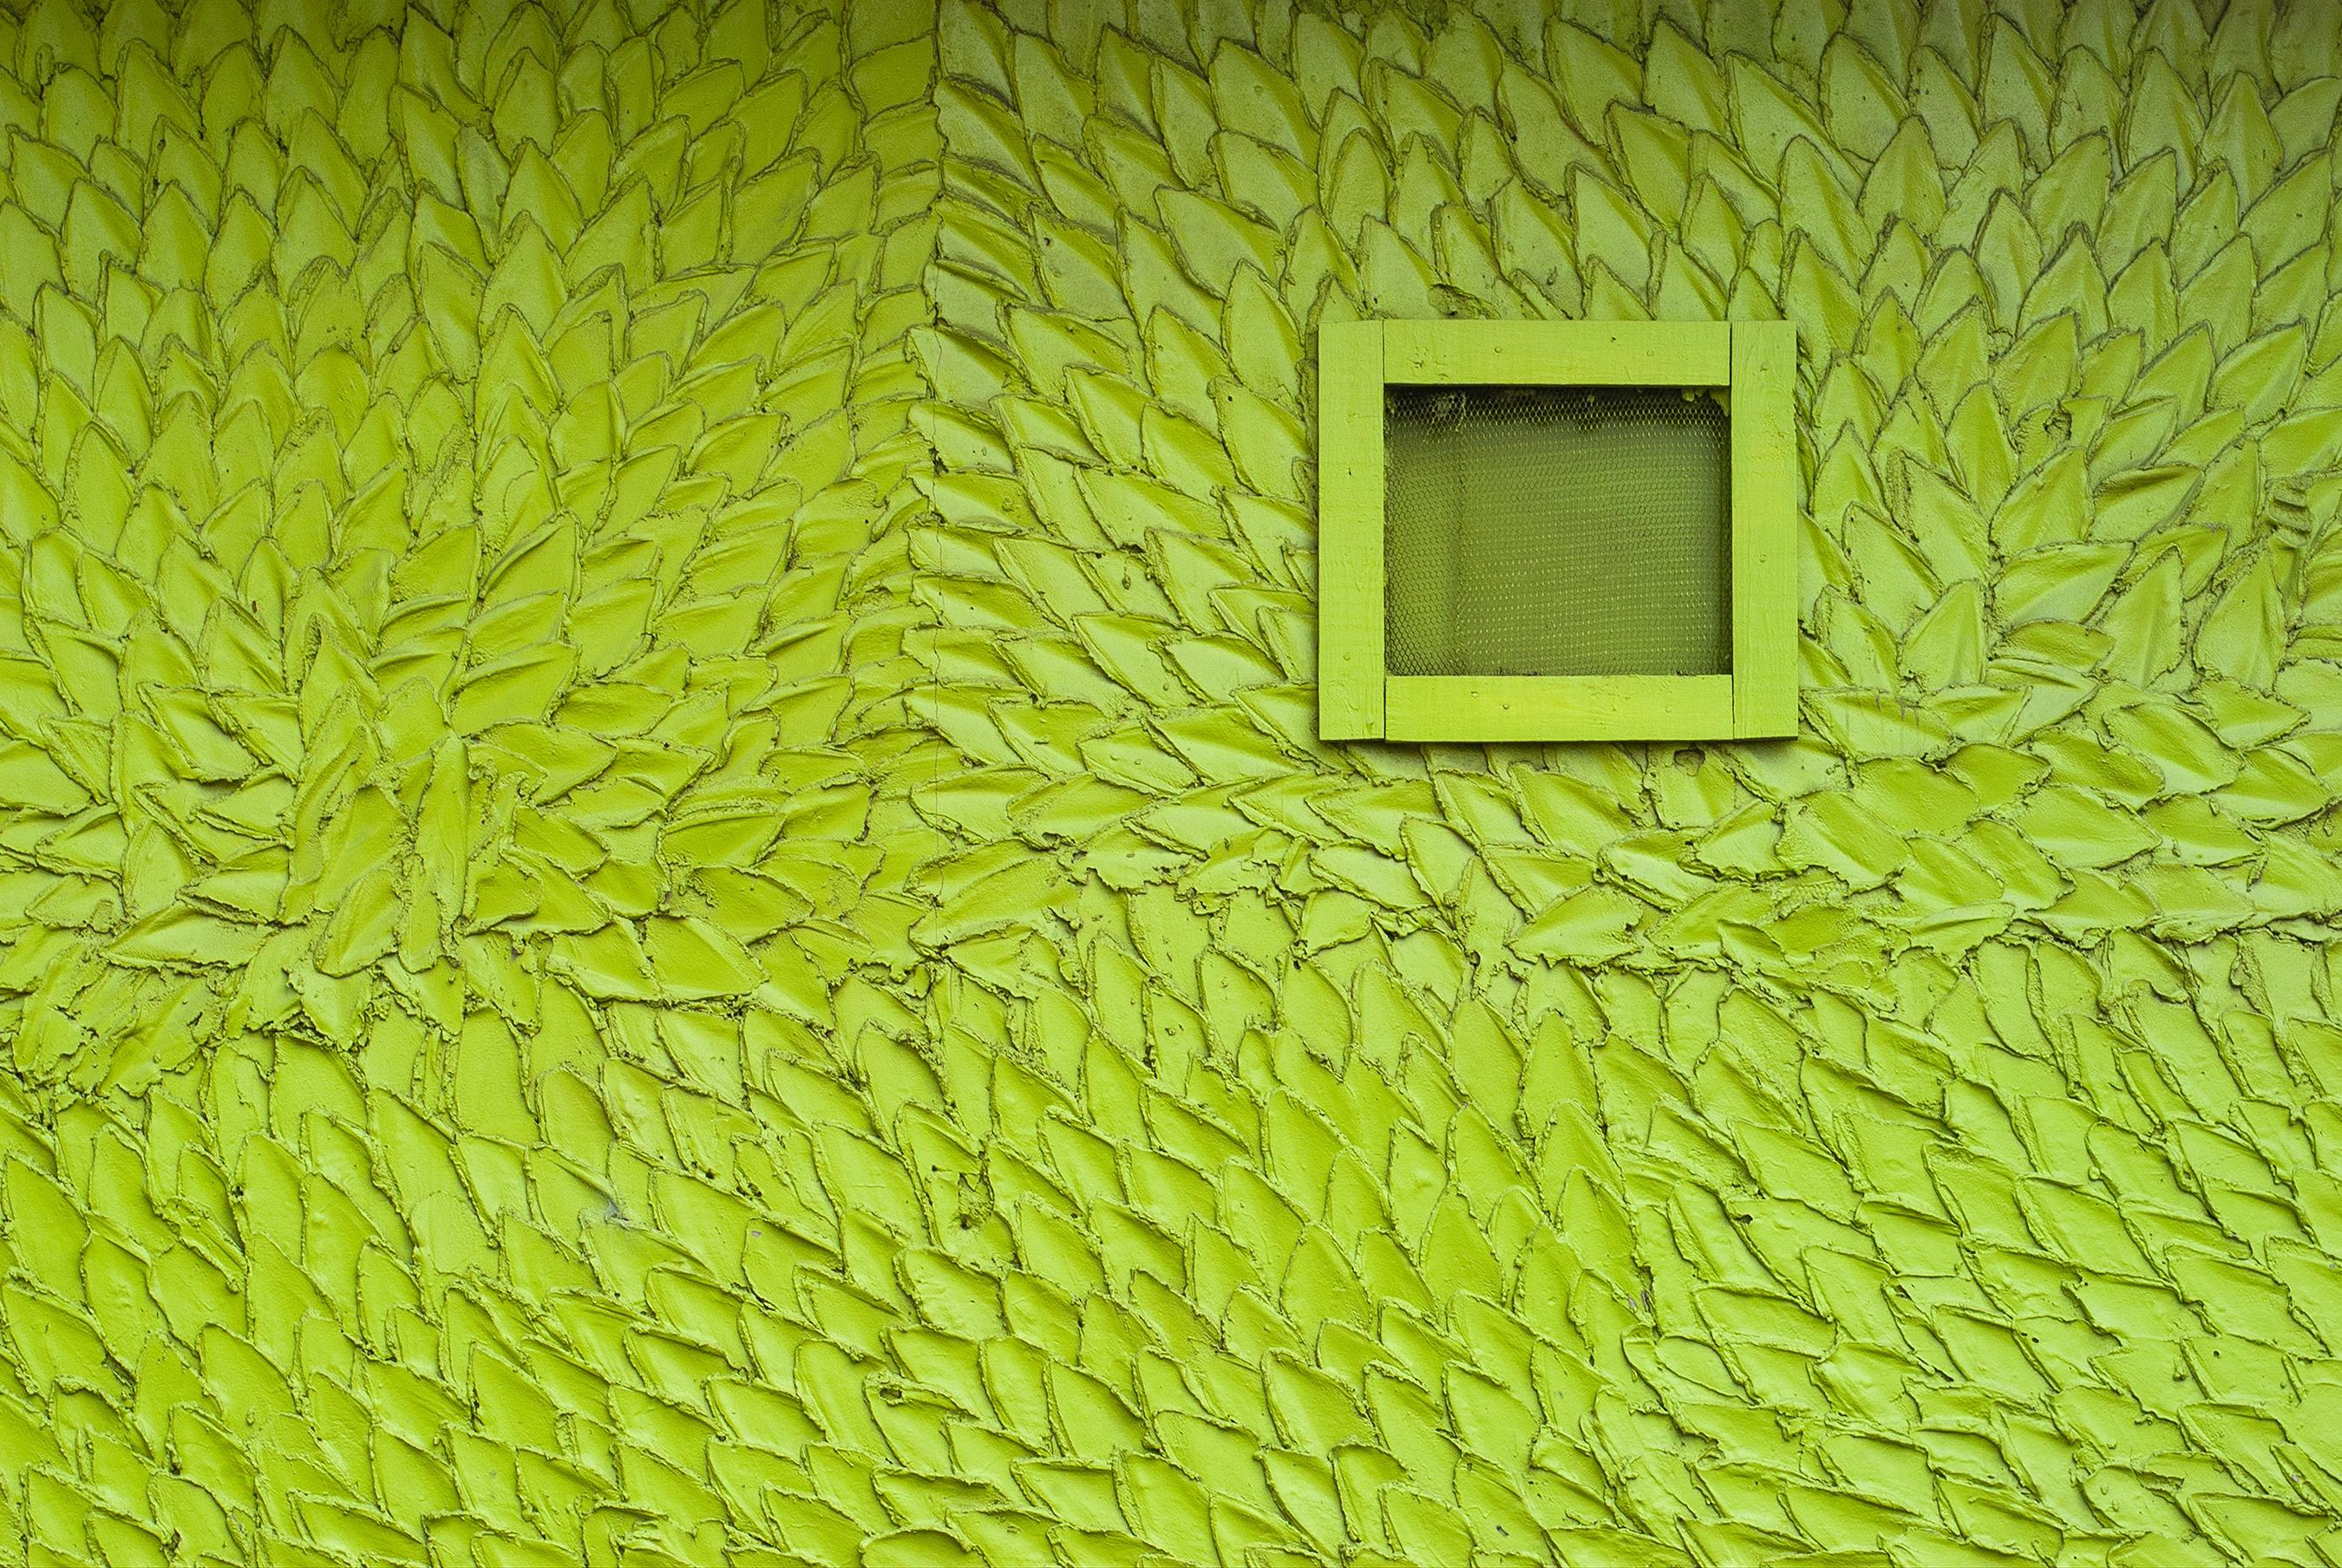 Jerry Siegel Color Photograph - "Green (Leaf Wall)" - Southern Documentary Photography - Christenberry